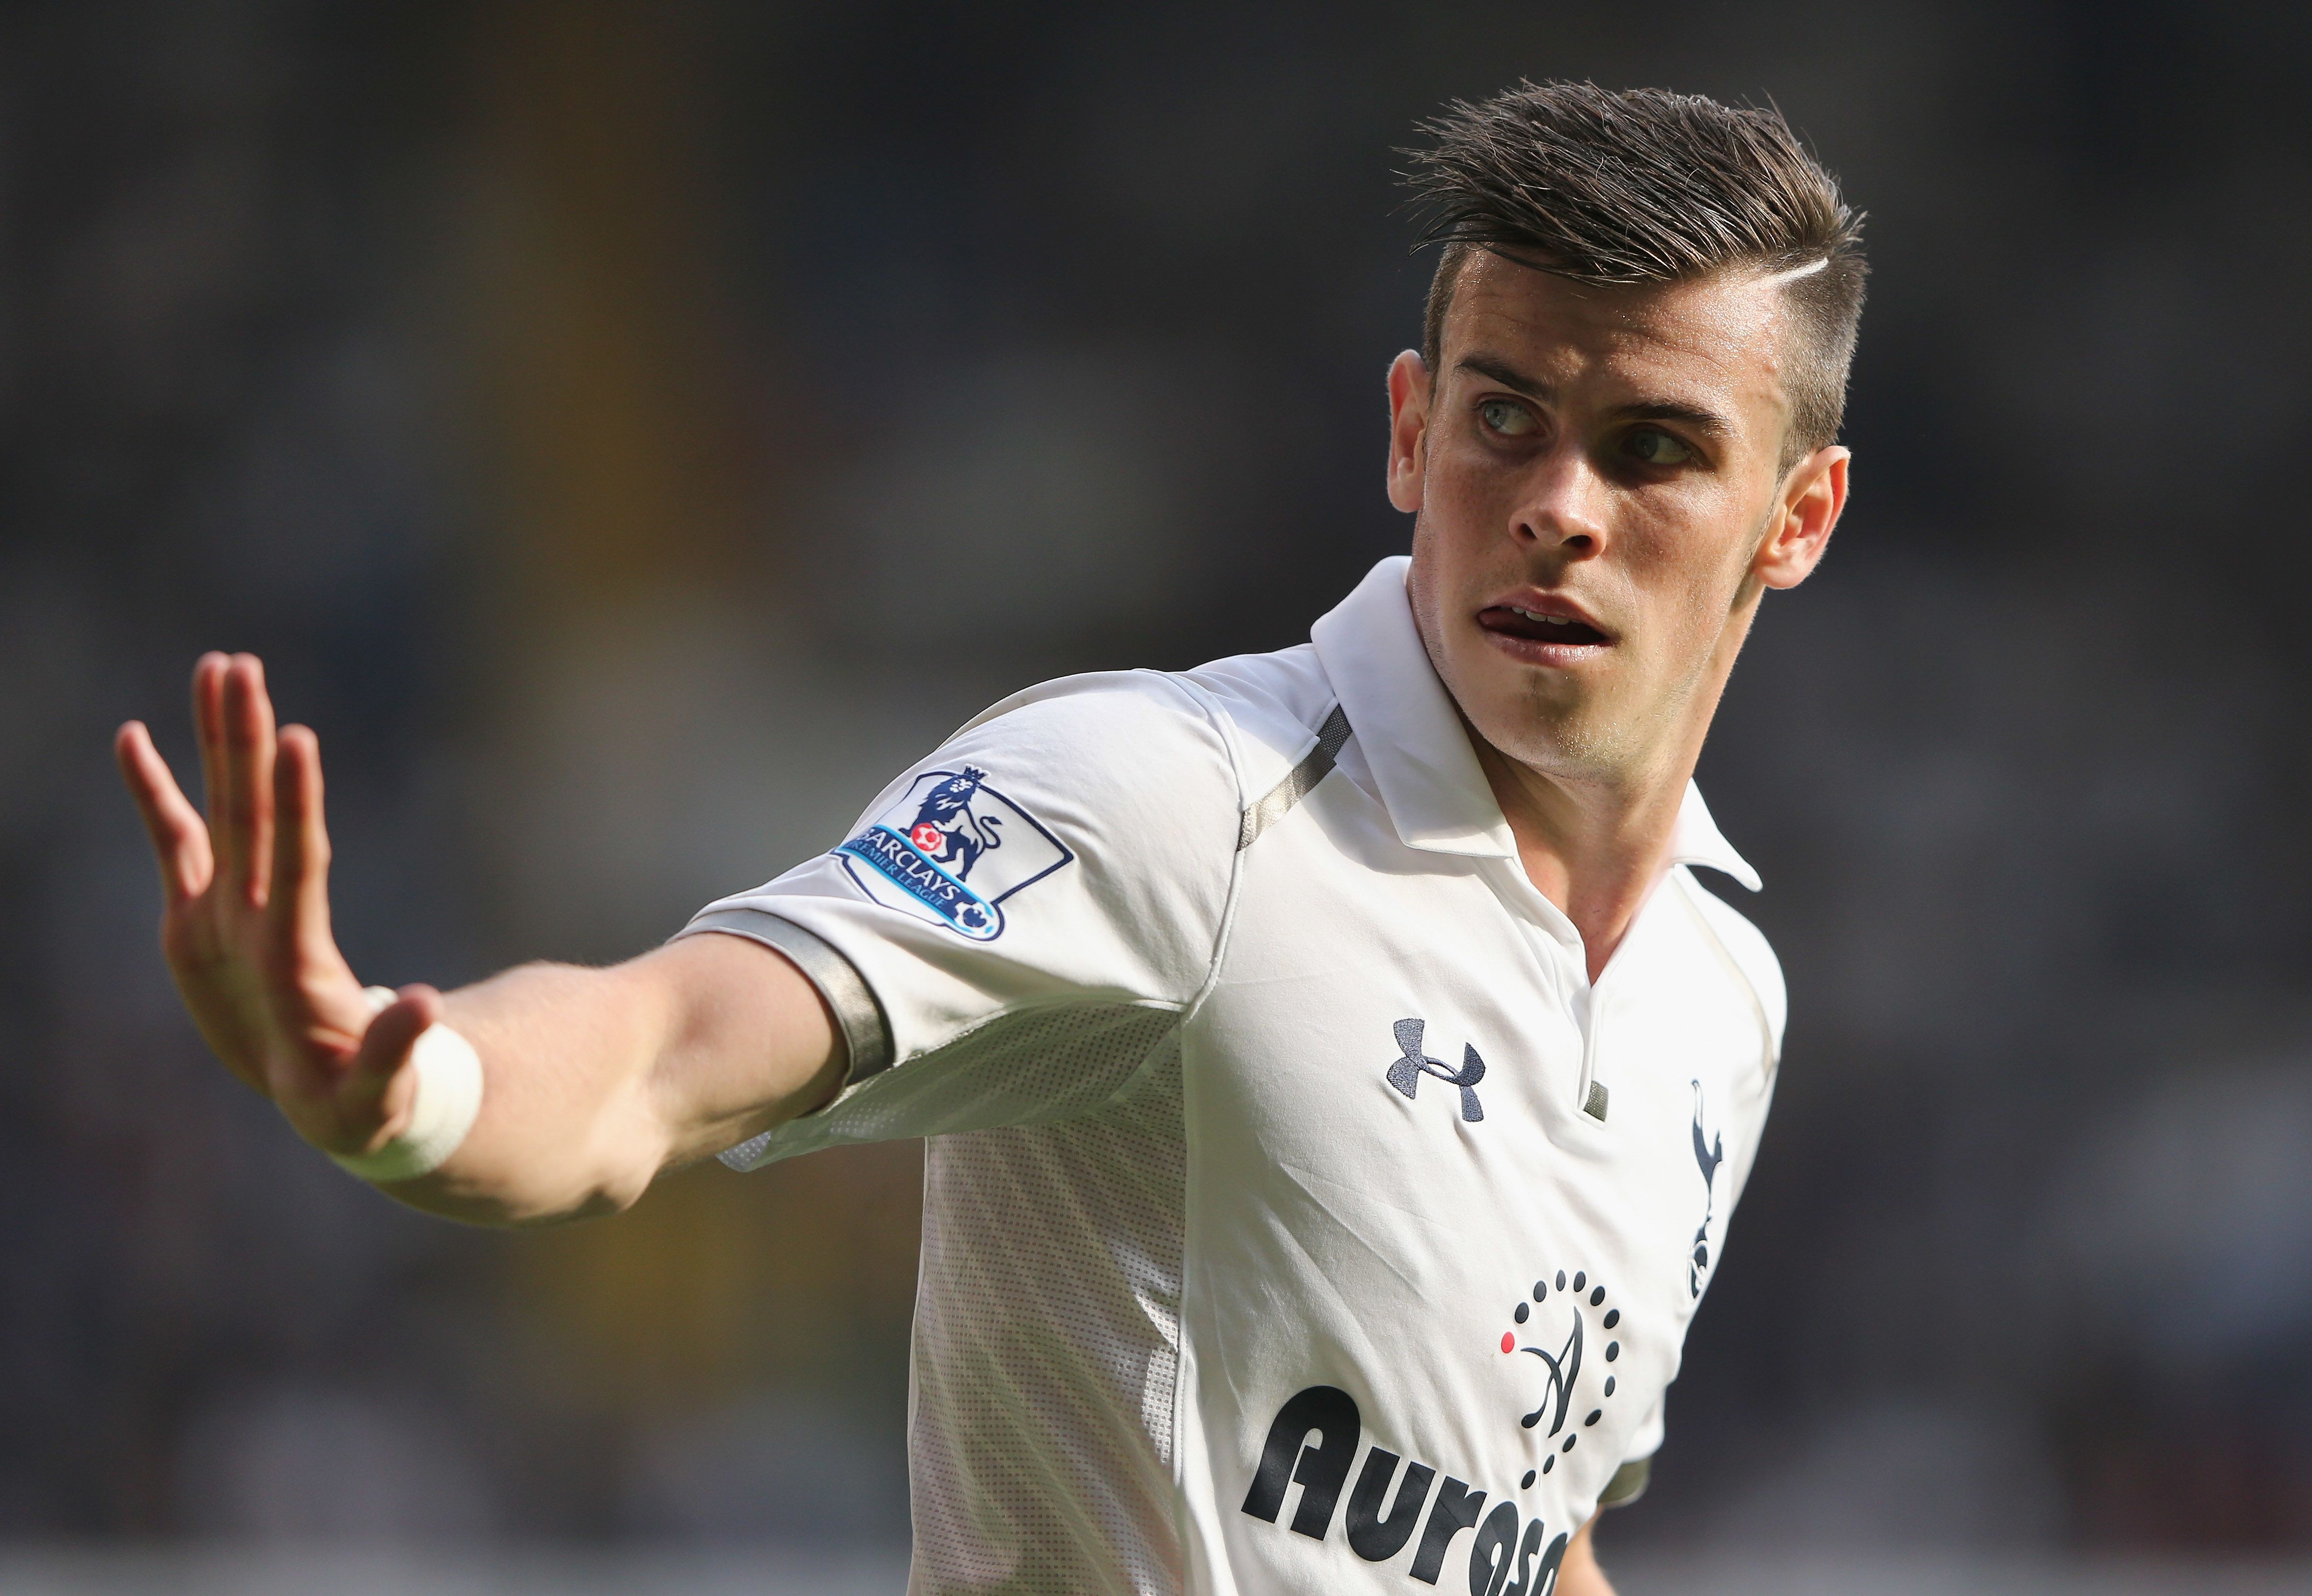 Gareth Bale Poised To Become Most Expensive Soccer Player In History